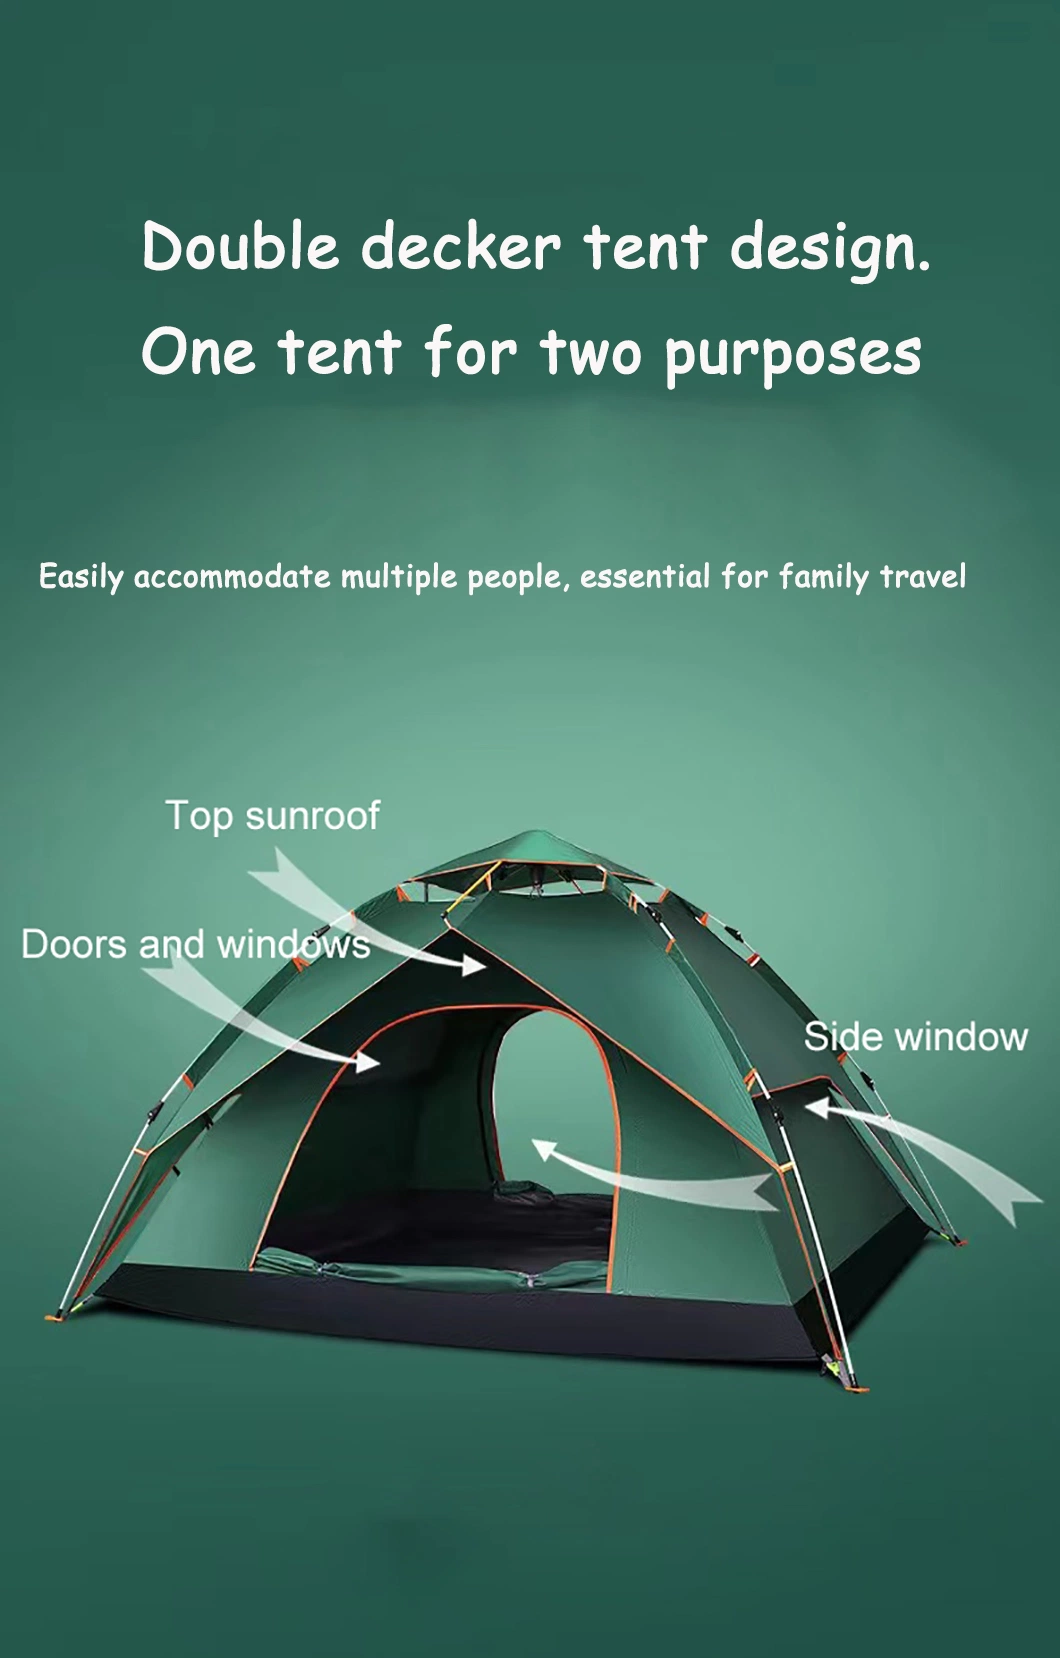 Outdoor Event Waterproof Large 2-6 Person Single&Double Layer Quick Open Camping Tent